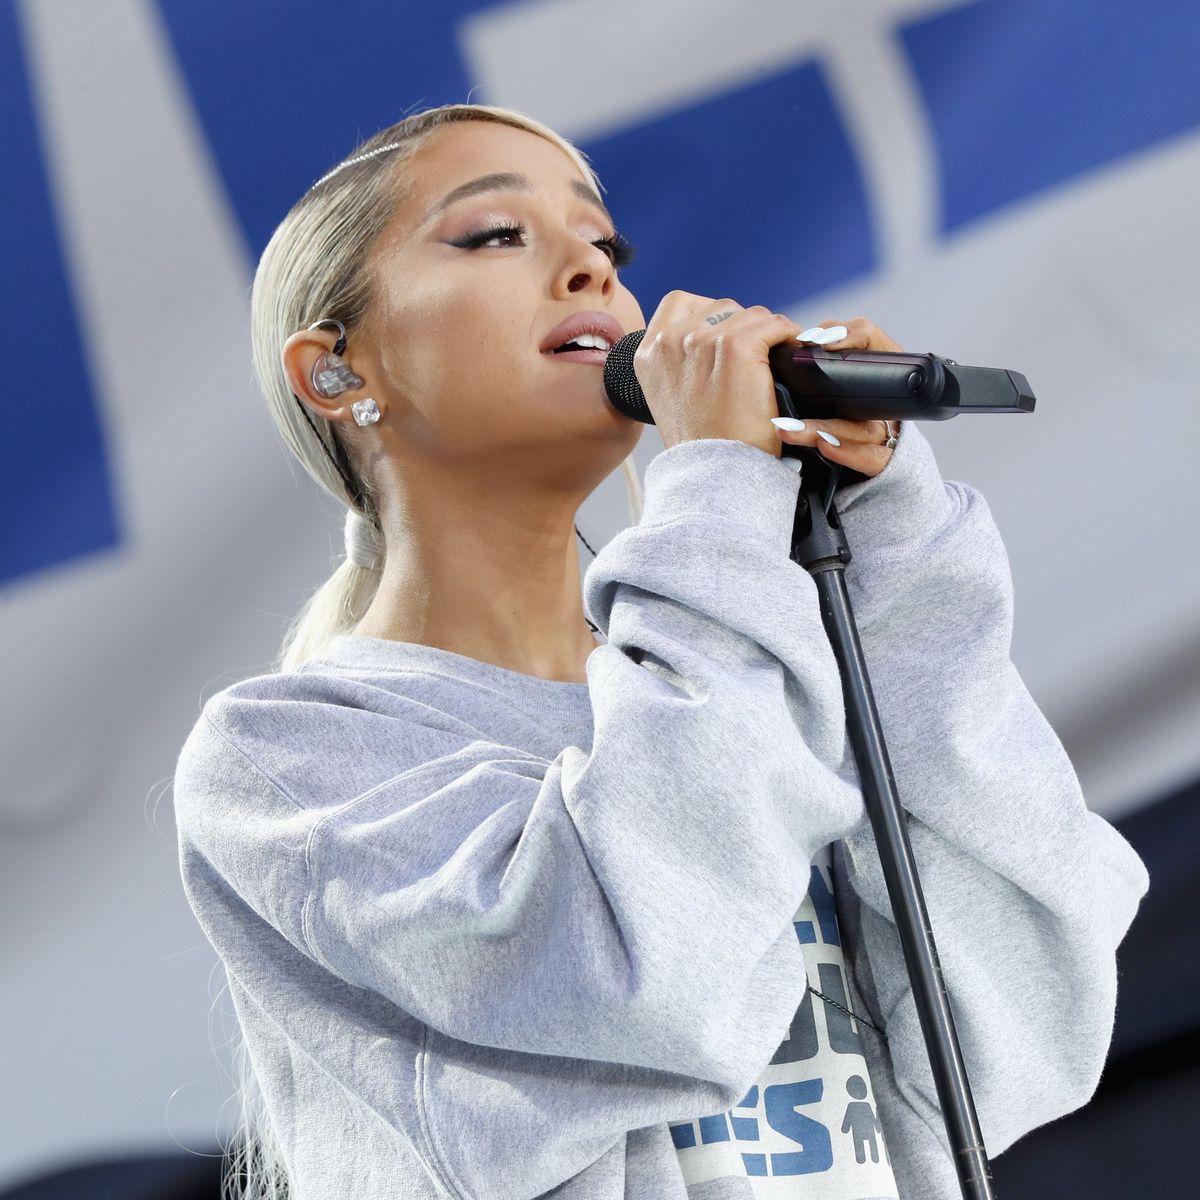 Ariana Grande Canceled 'SNL' Appearance for "Emotional Reasons" Why